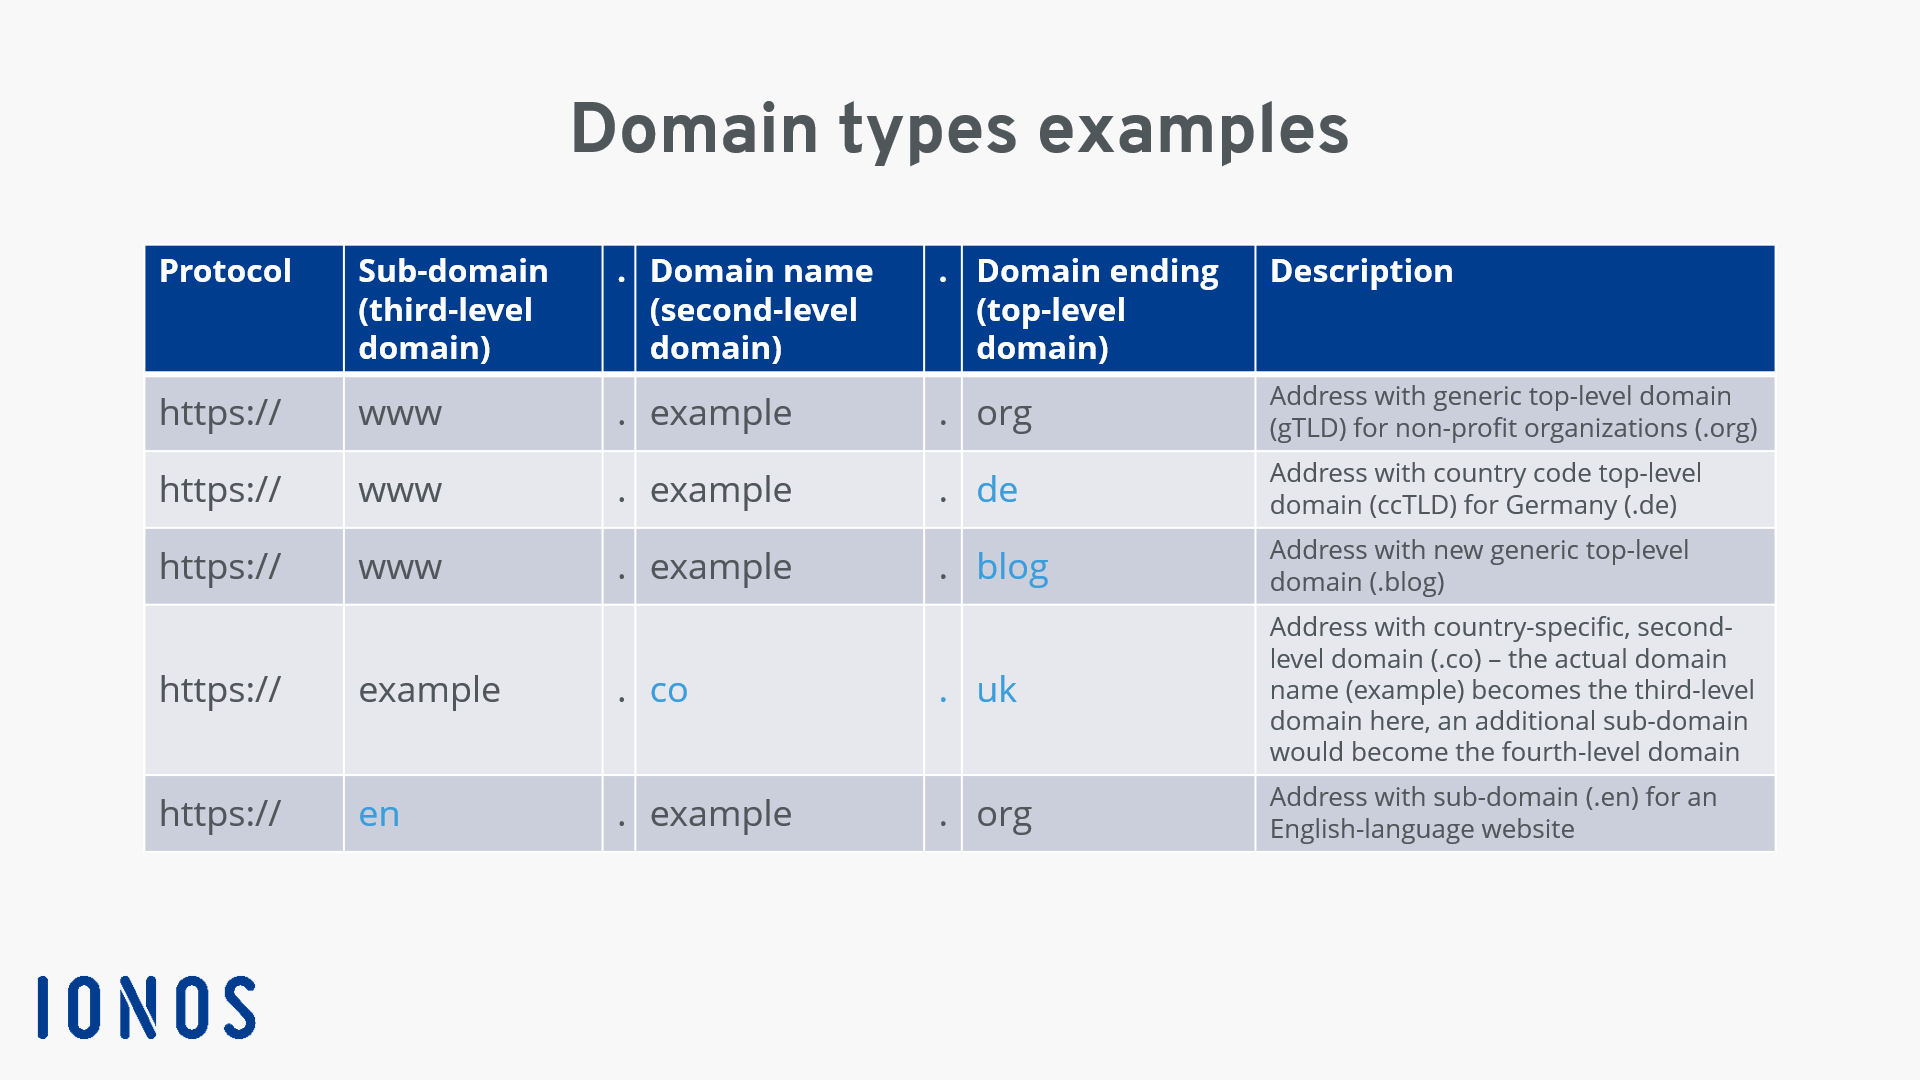 types-of-domain-examples-of-domain-levels-and-endings-ionos-ca